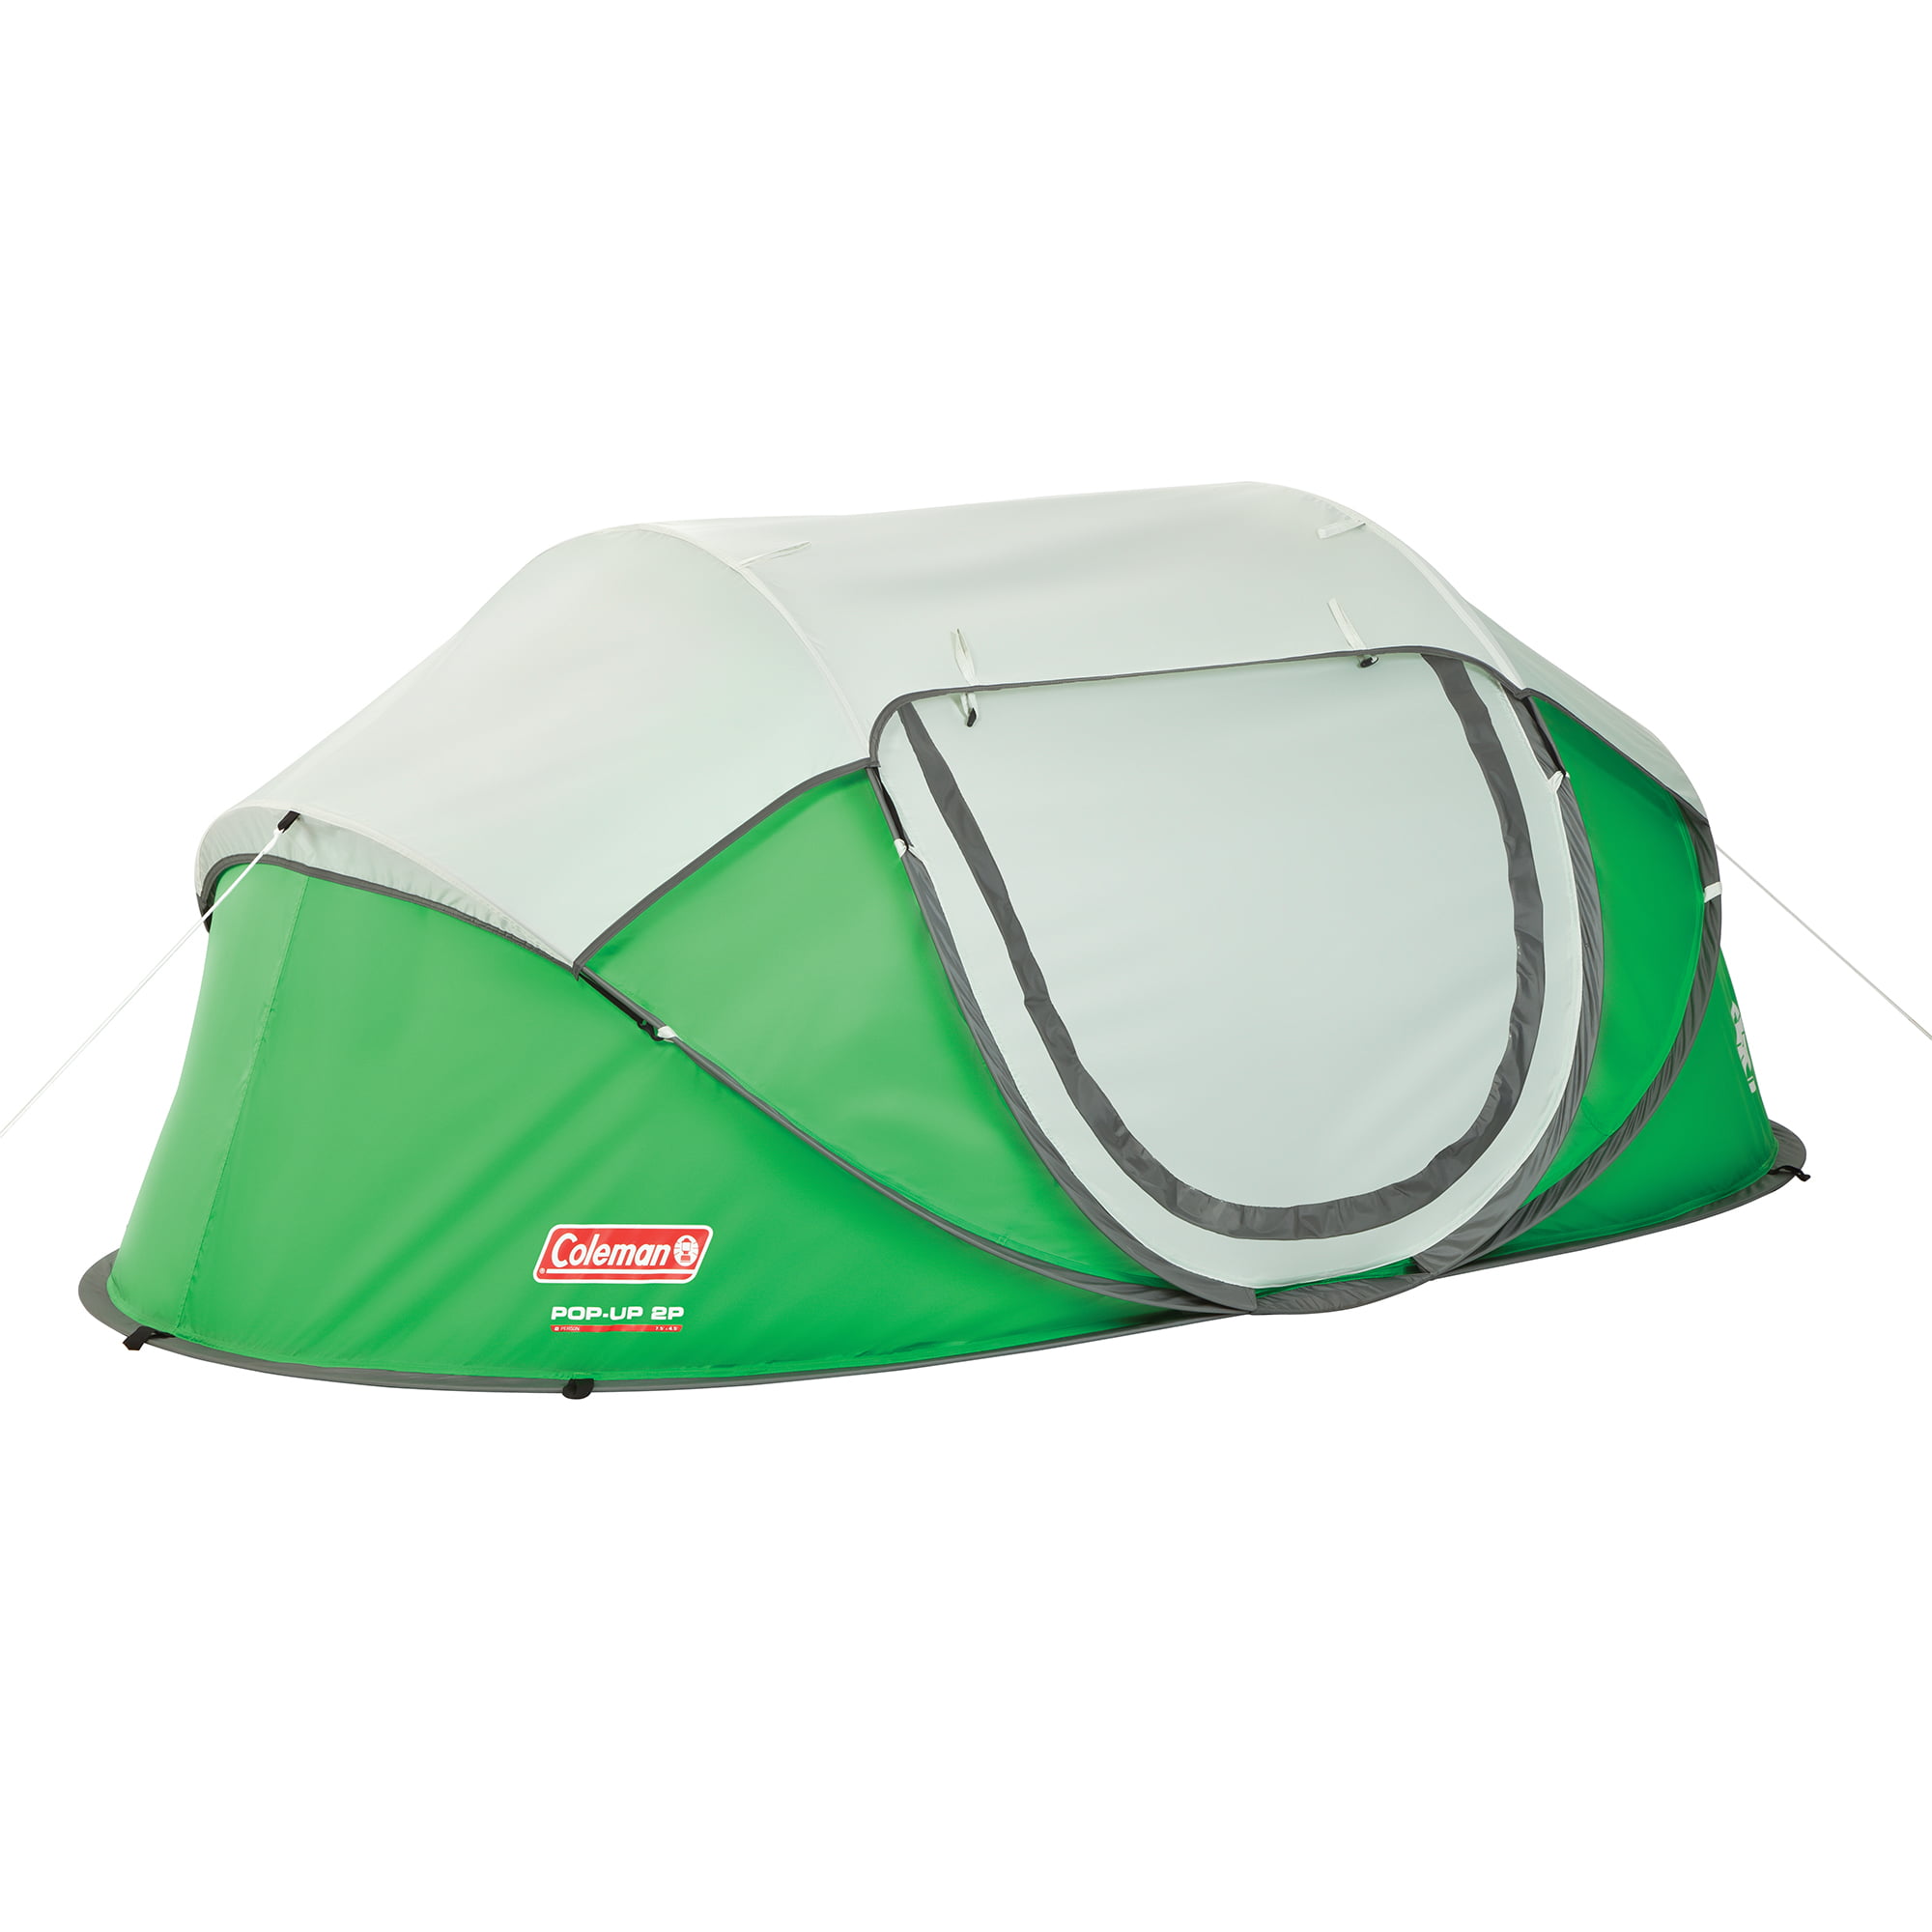 4 man pop up tent with porch